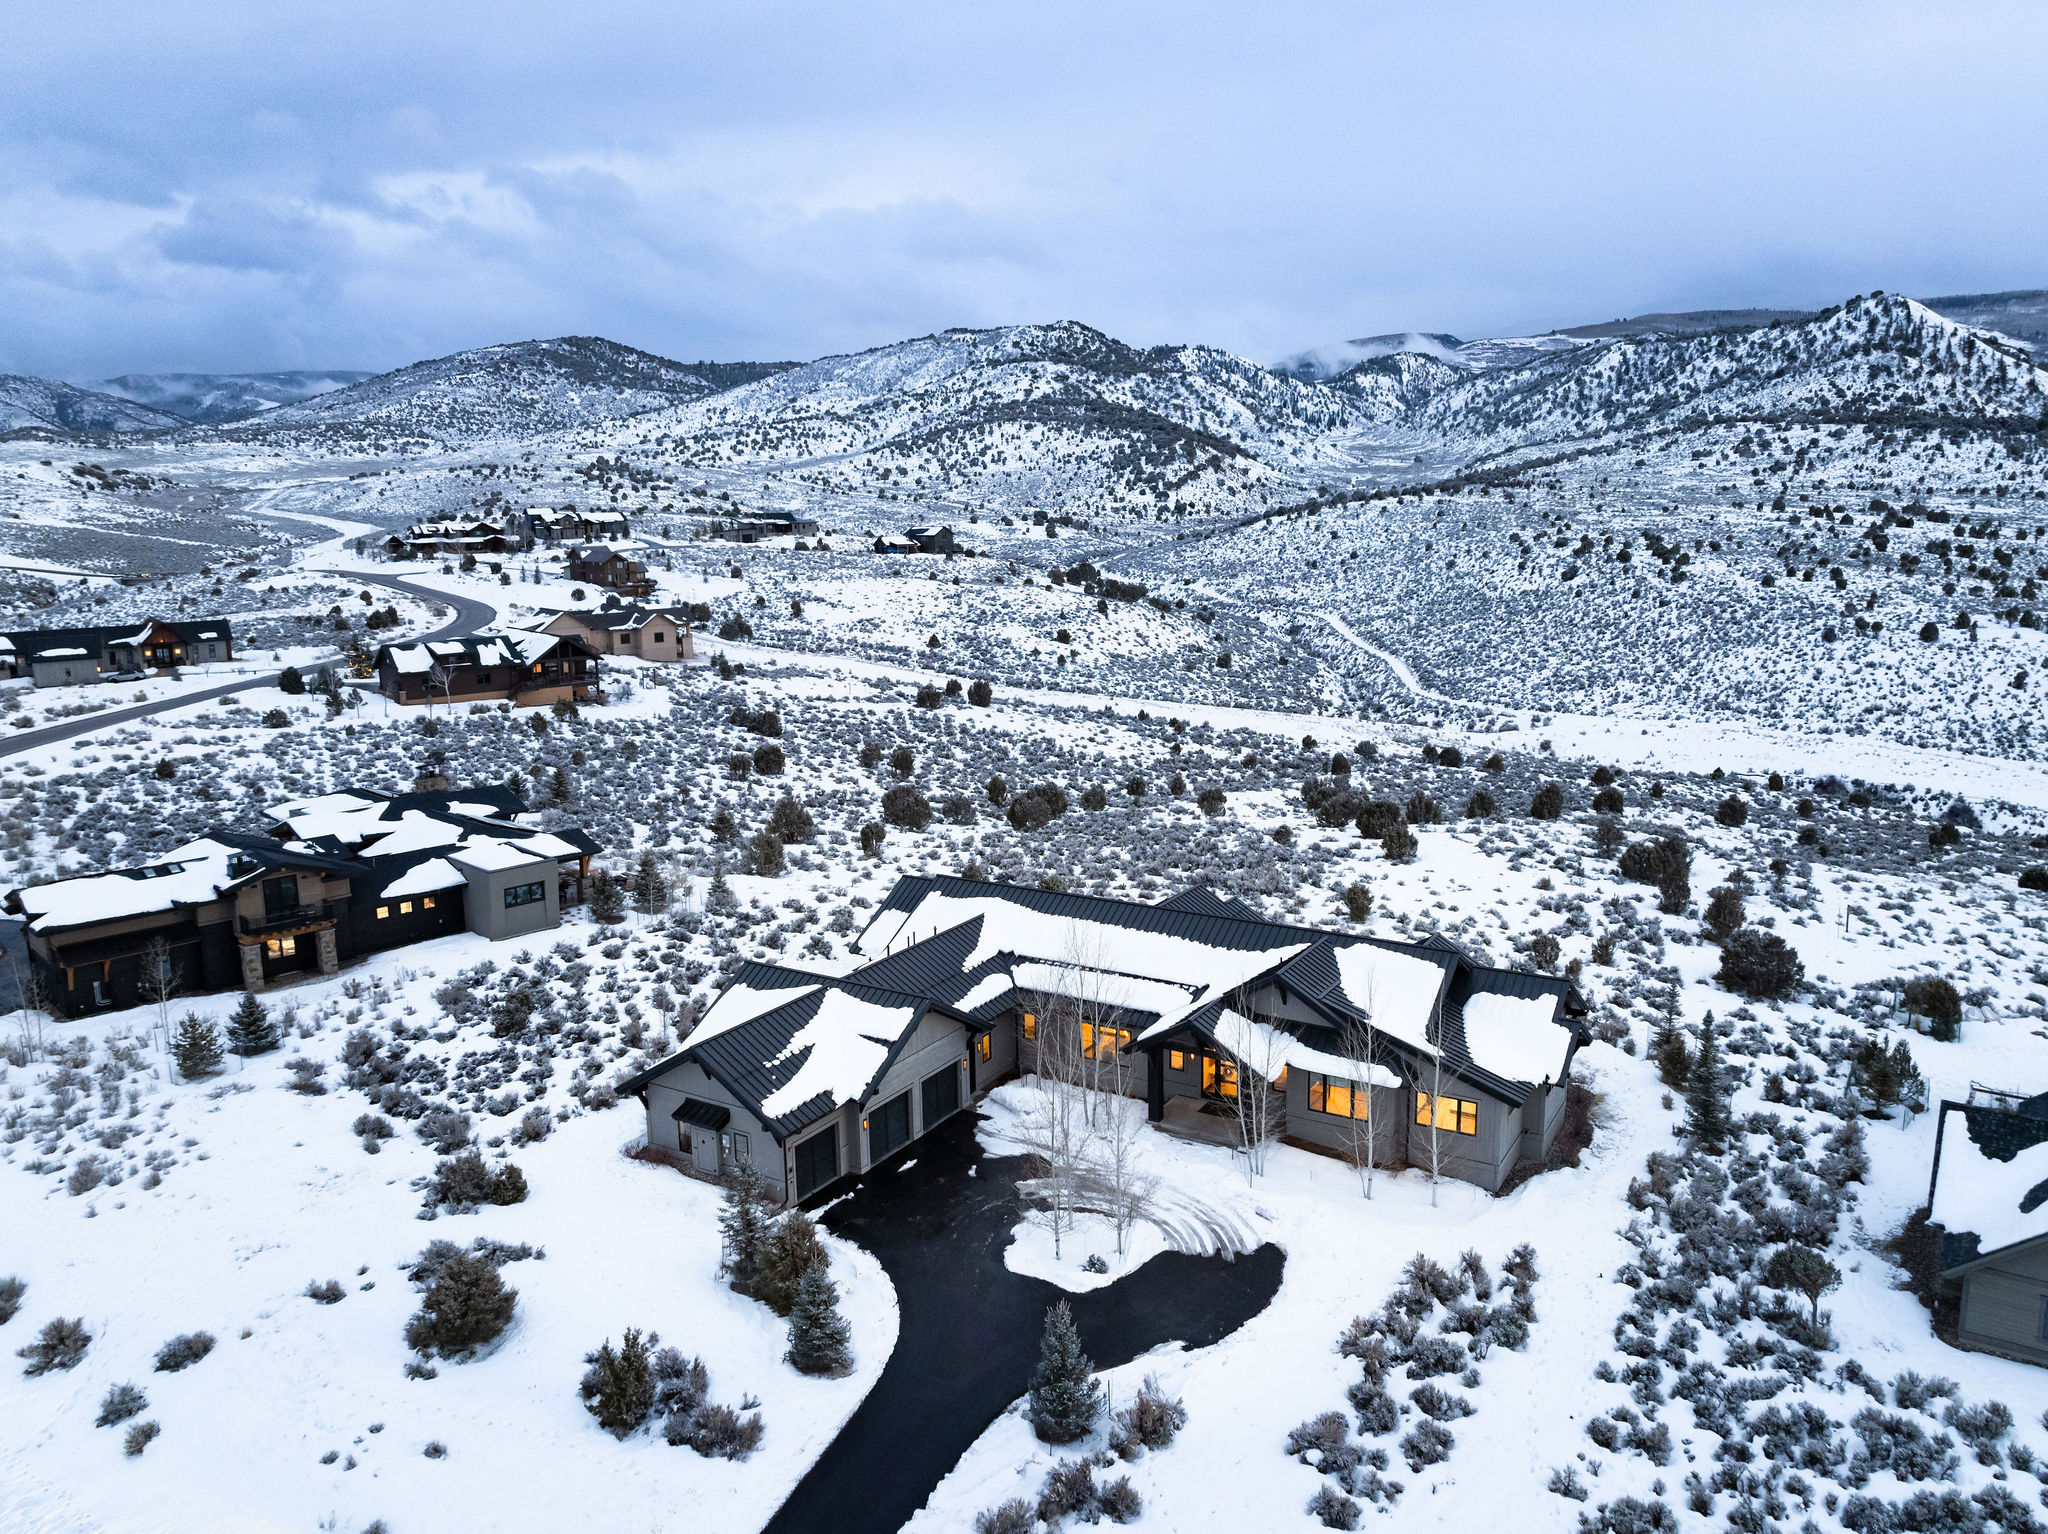 A collection of homes on a snowy hilly landscape with lots of trees.